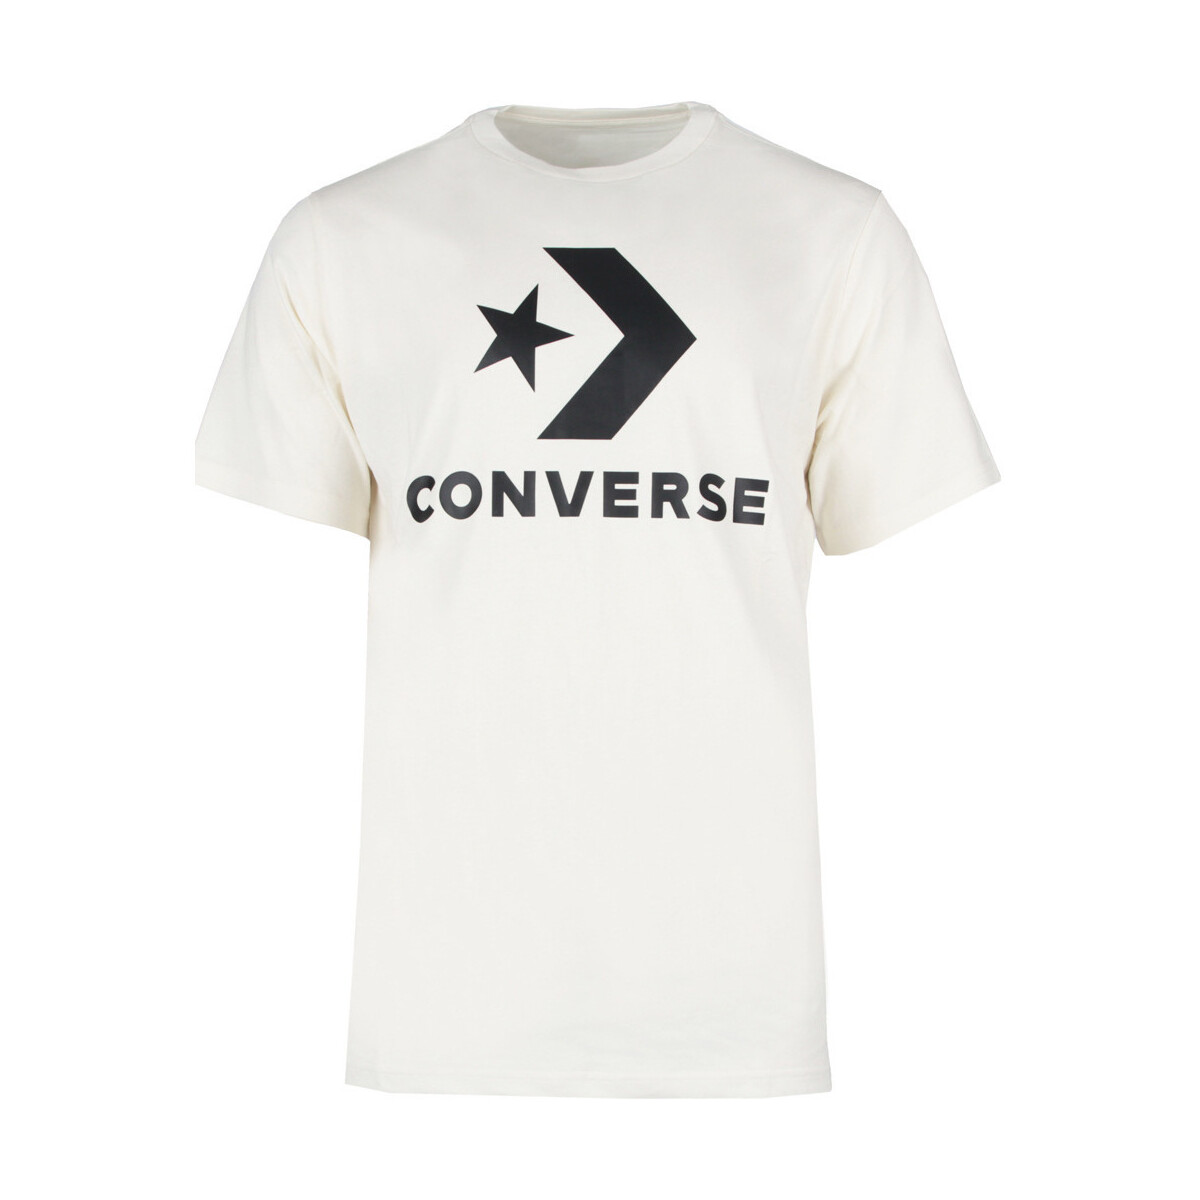 Vêtements Homme Polos manches courtes Converse LOGO STAR CHEV  SS TEE Multicolore